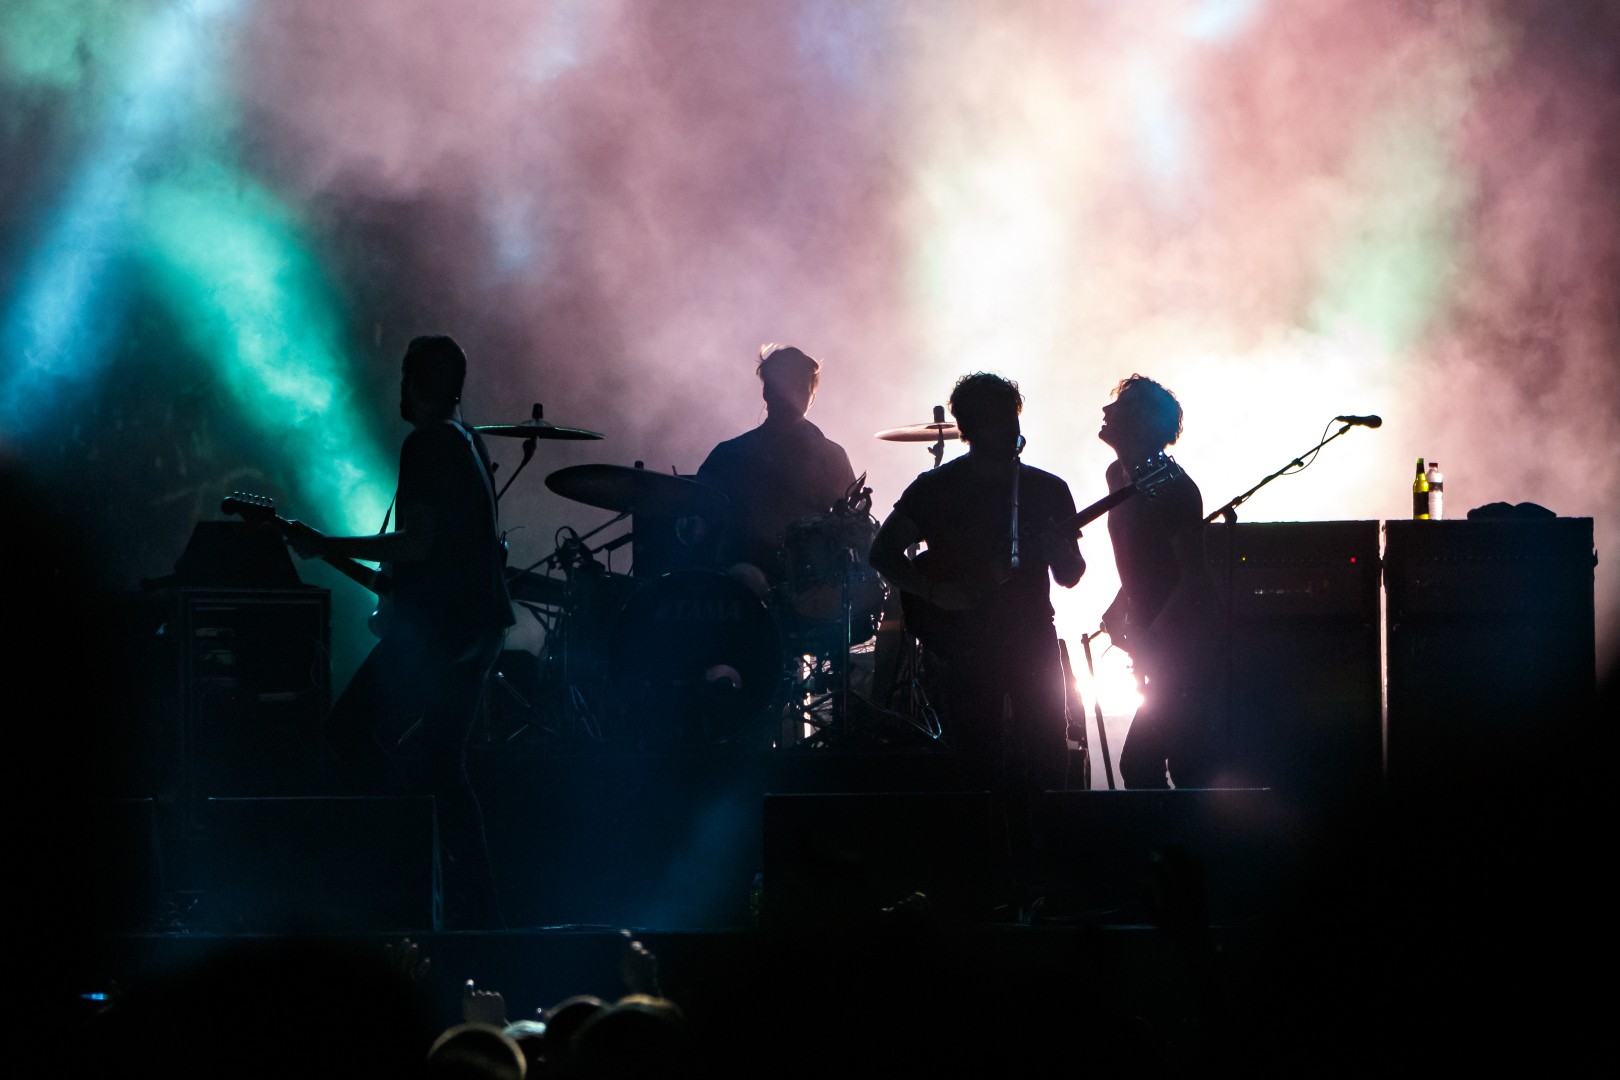 Foals at Domeniul Stirbey in Buftea on August 8, 2015 (d7a2a81967)